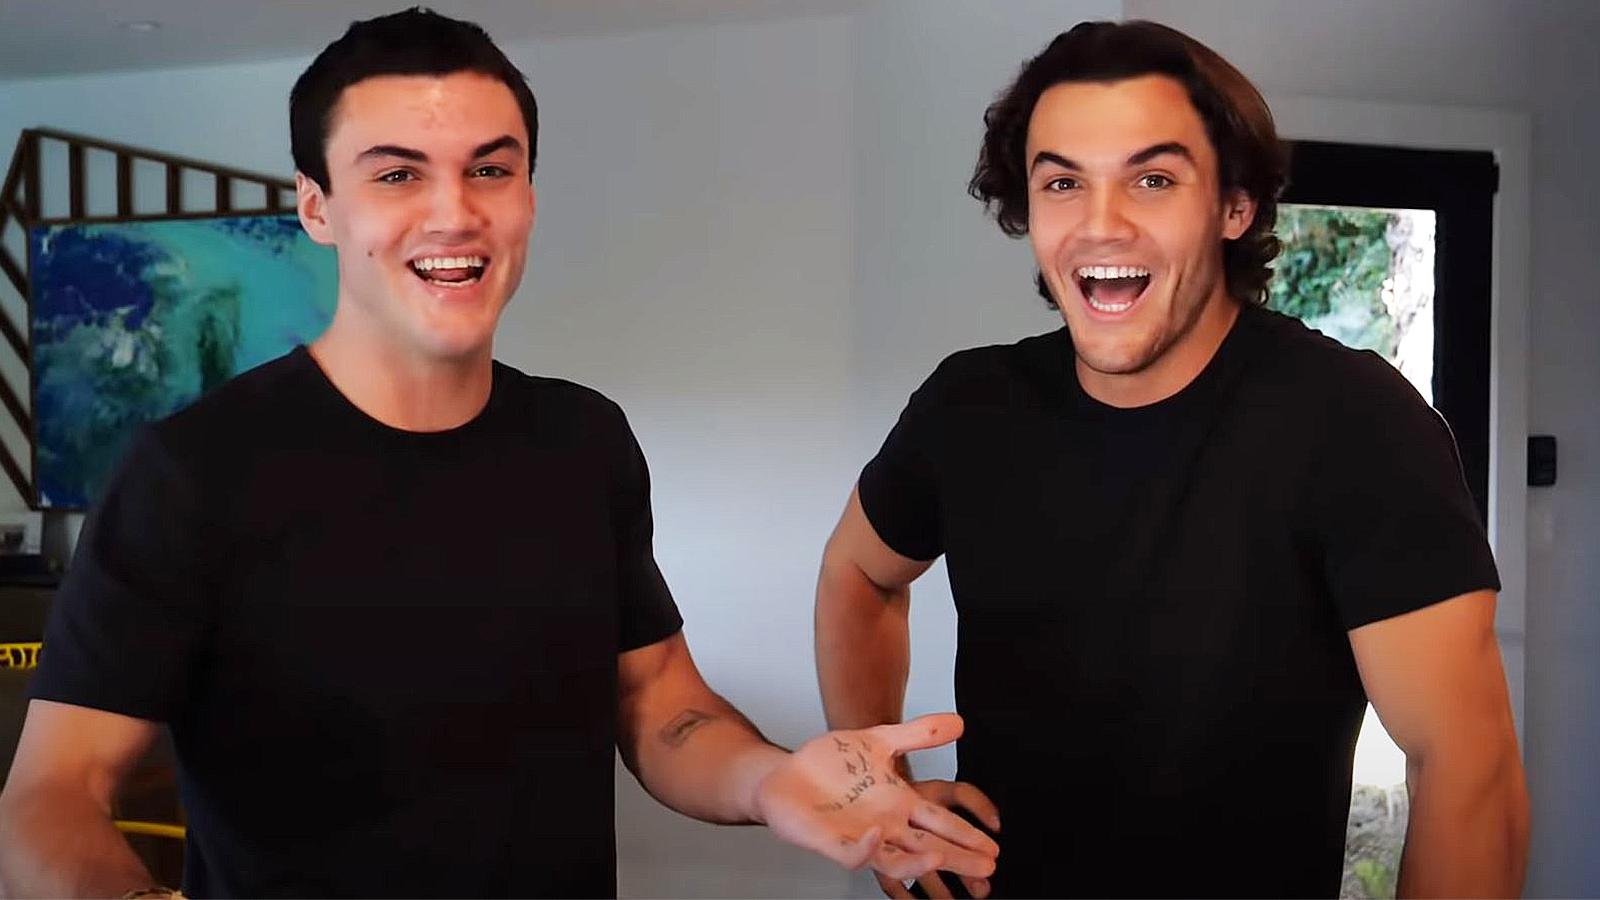 The Dolan Twins, Grayson and Ethan